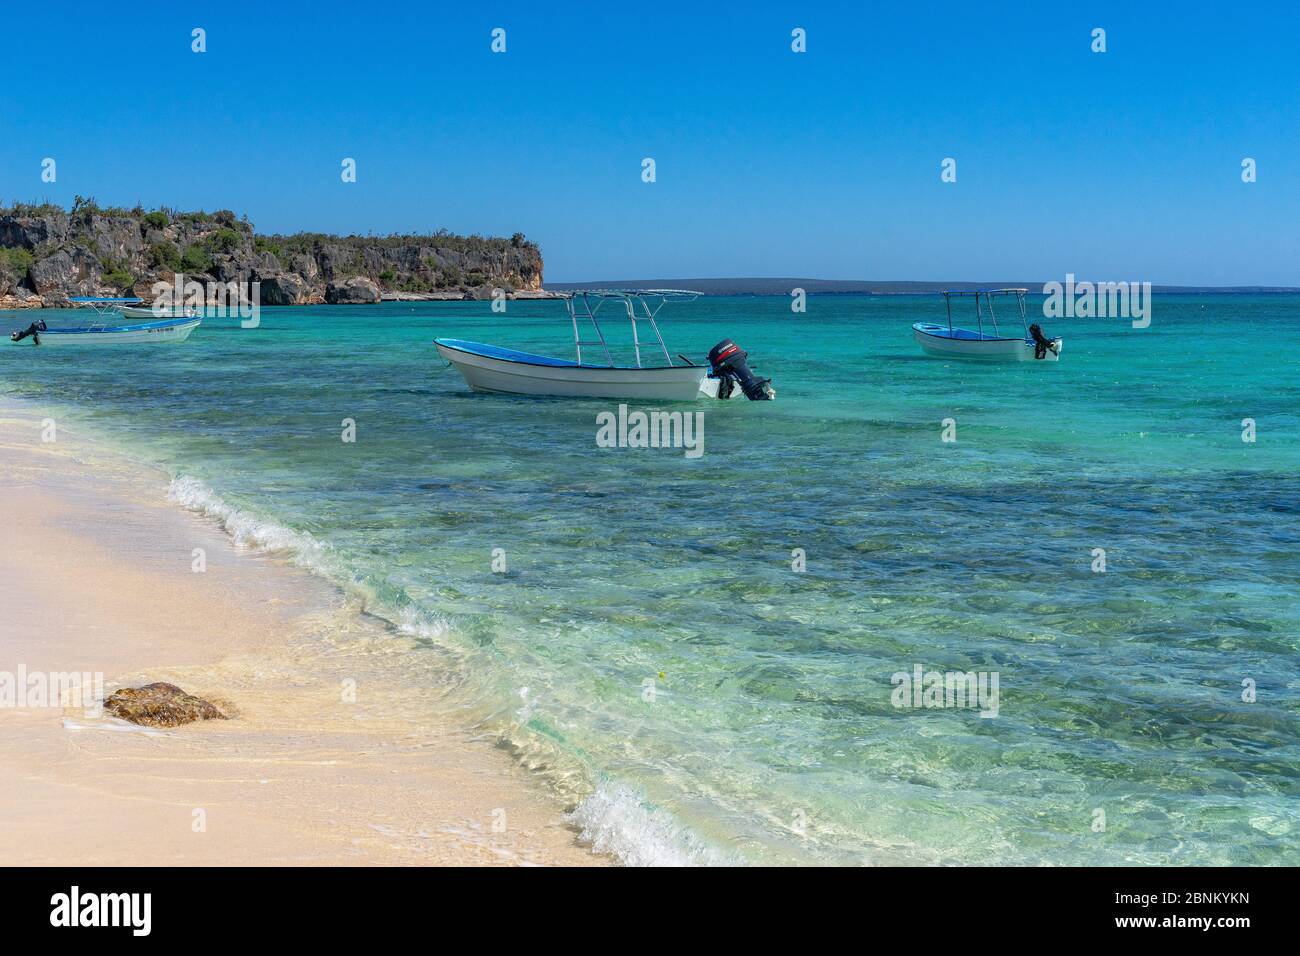 America, Caribbean, Greater Antilles, Dominican Republic, Pedernales, excursion boats glide in the turquoise waters of the Bahía de las Aguilas Stock Photo